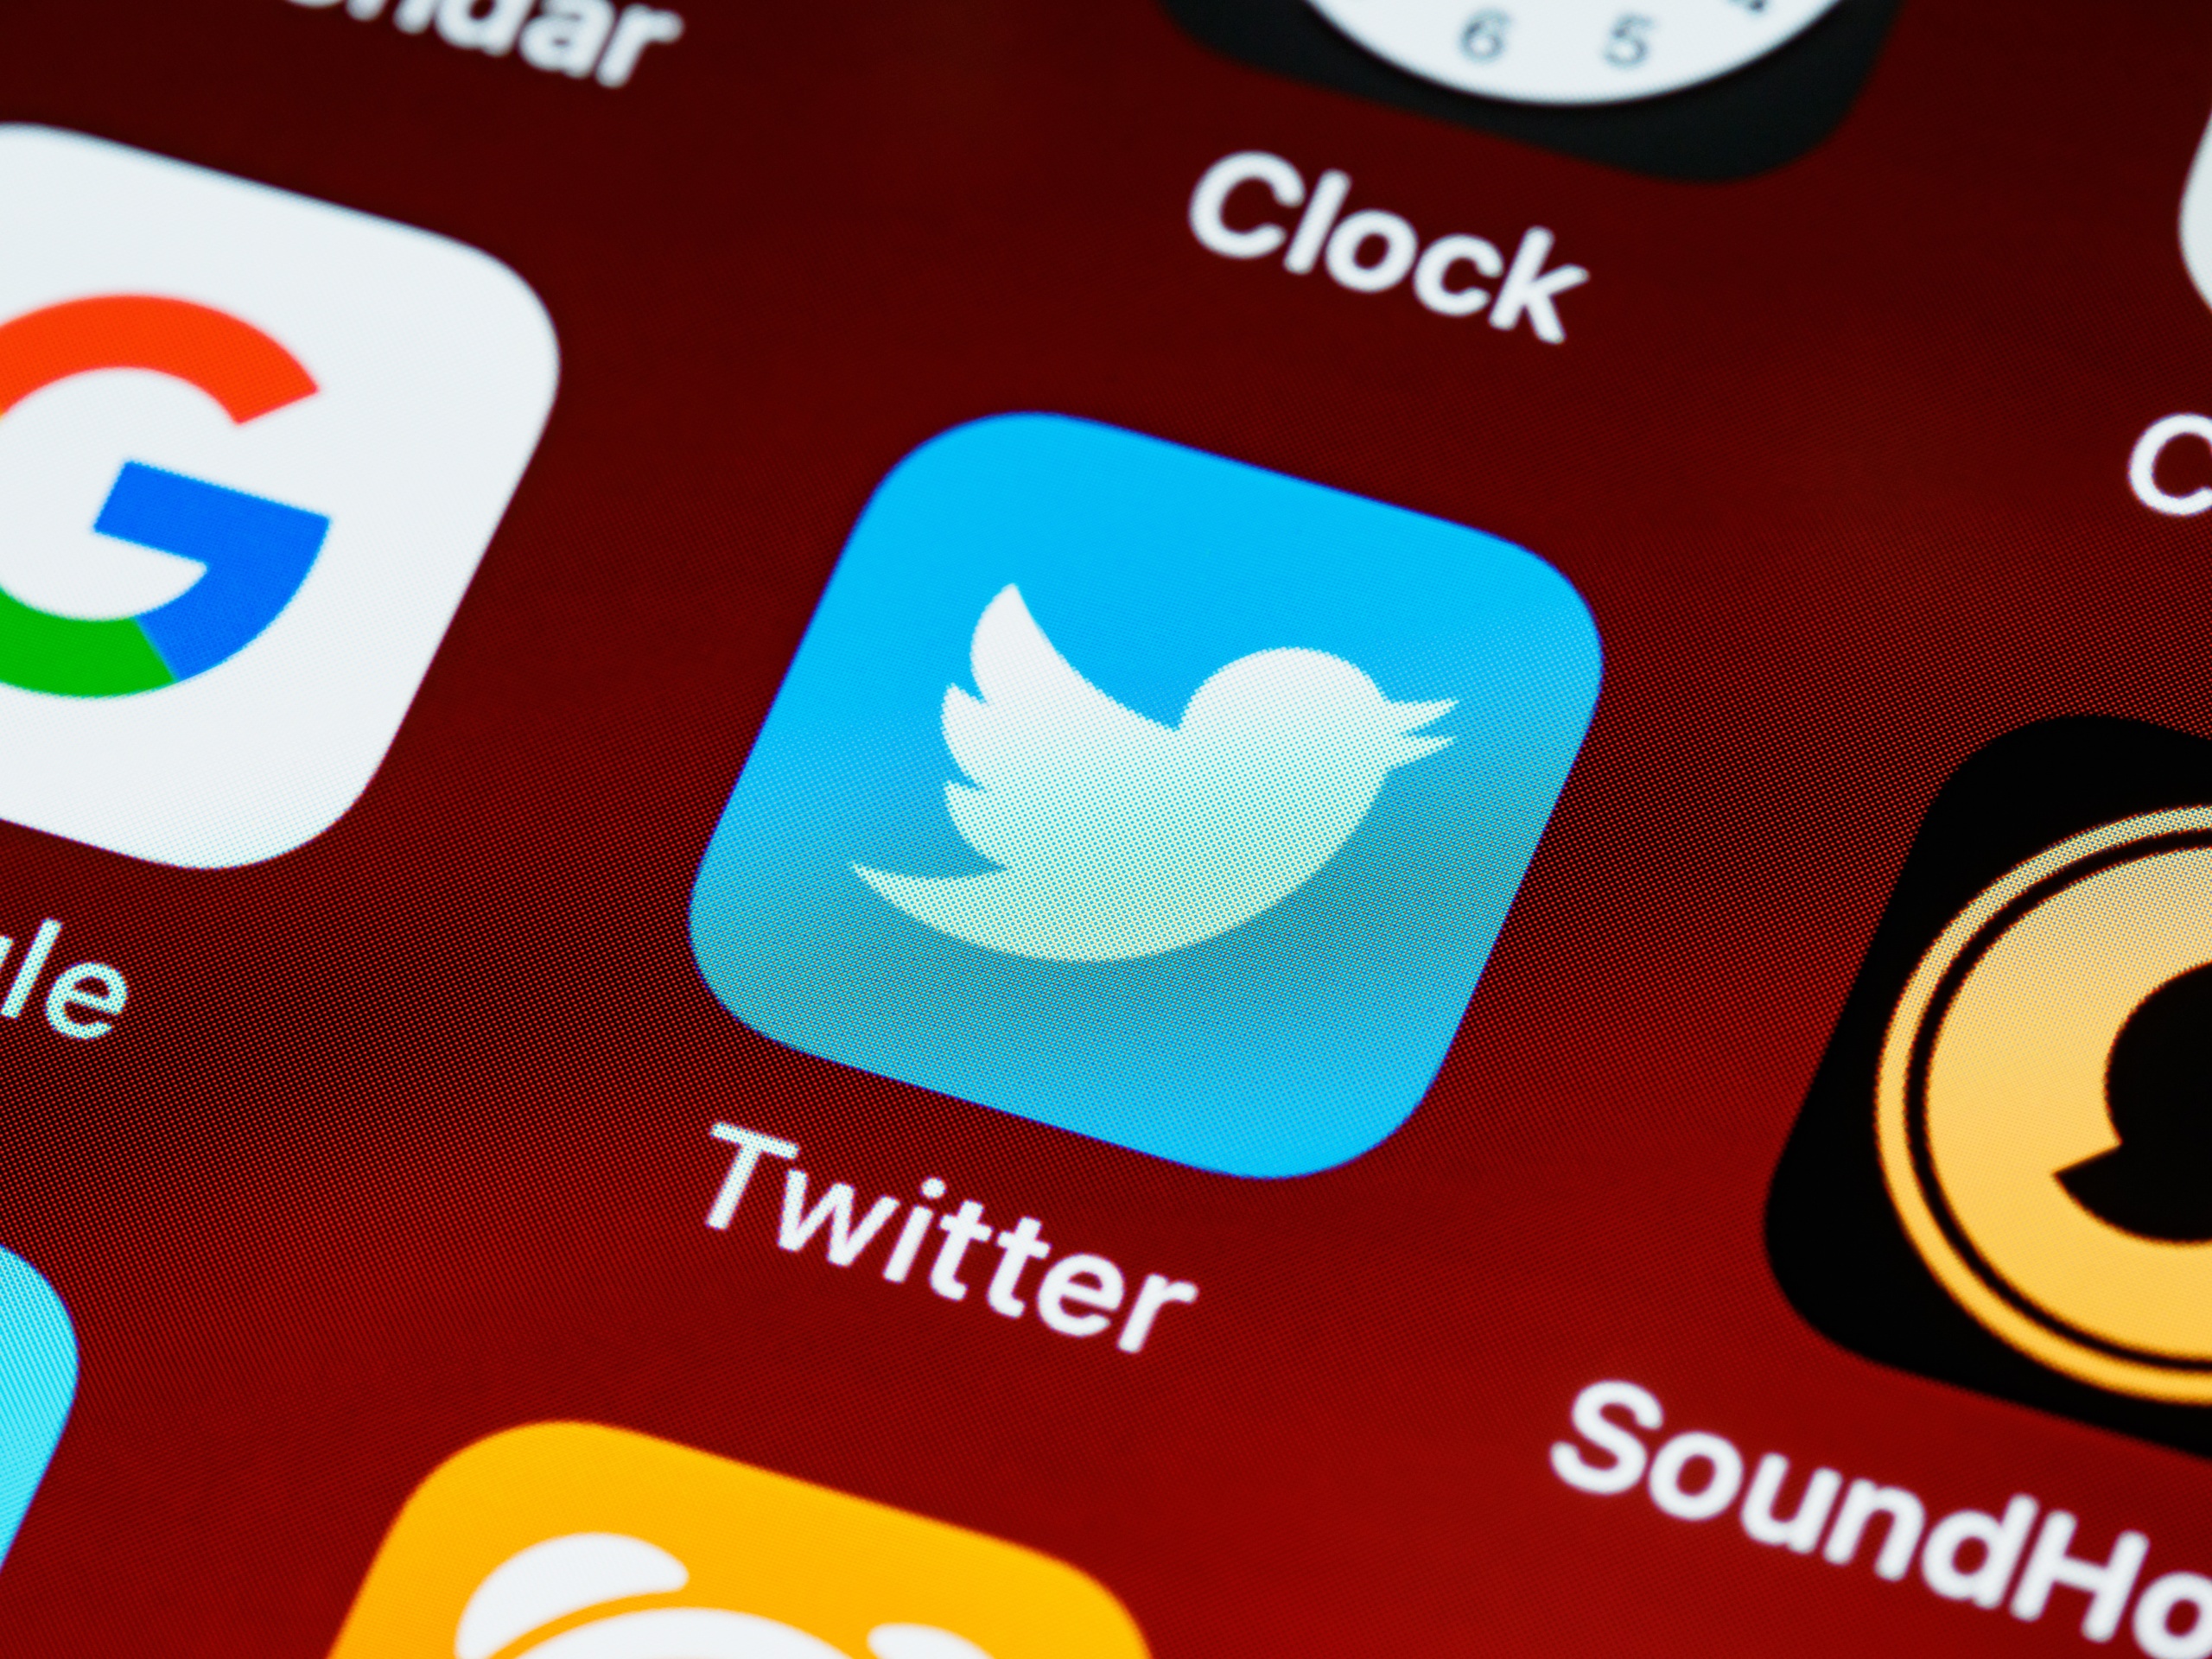 From Tweets to Creations: Twitter's Bold Step in Doubling Down